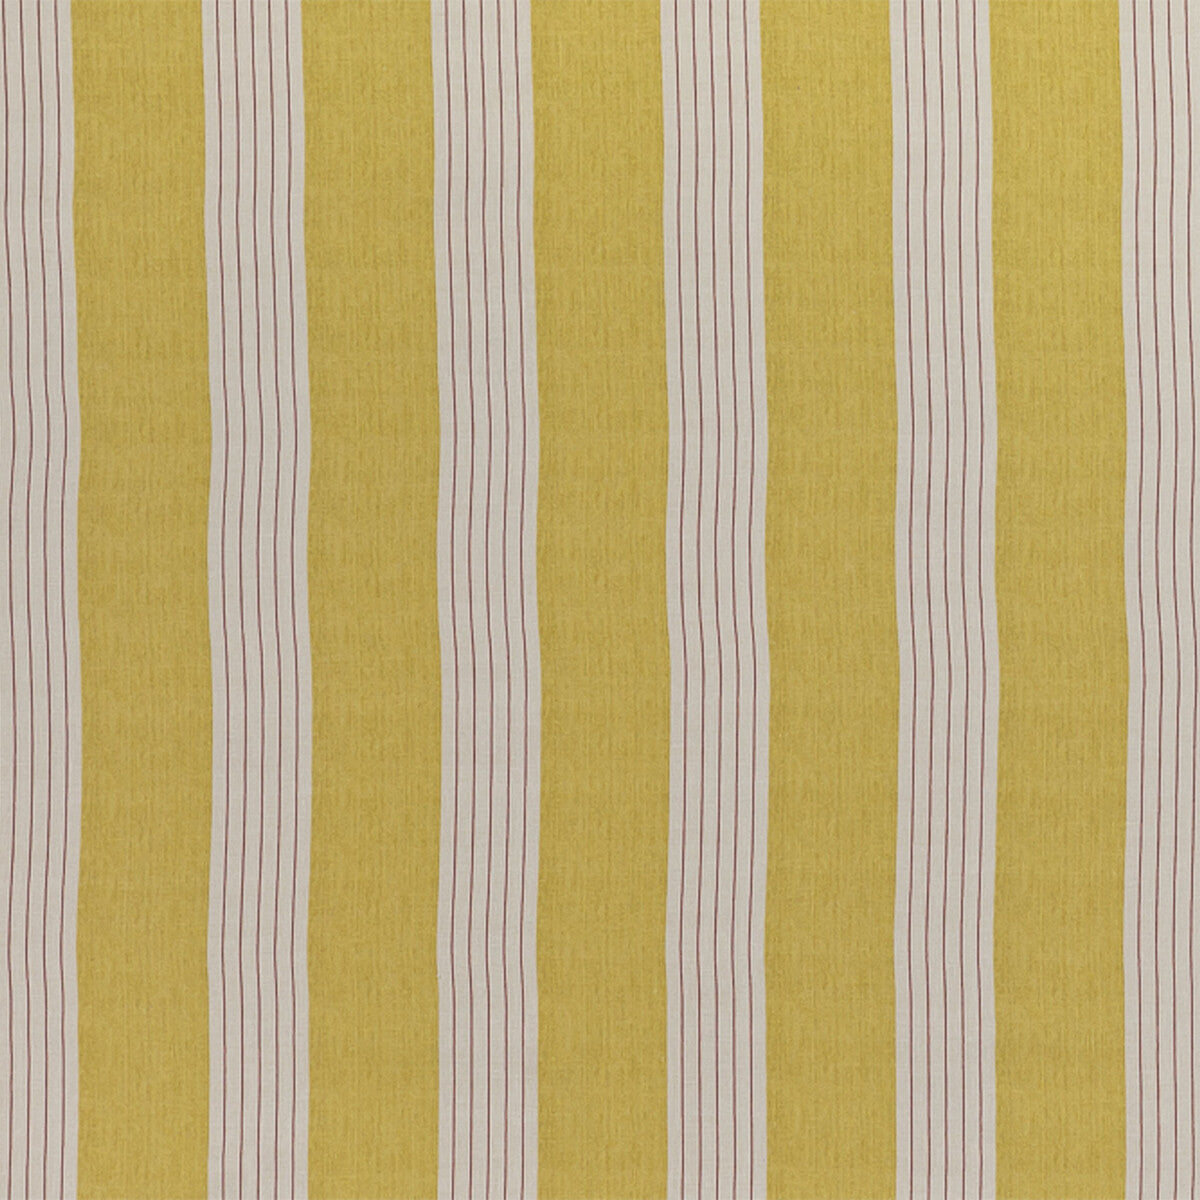 Lambert Stripe fabric in yellow color - pattern BFC-3697.40.0 - by Lee Jofa in the Blithfield collection